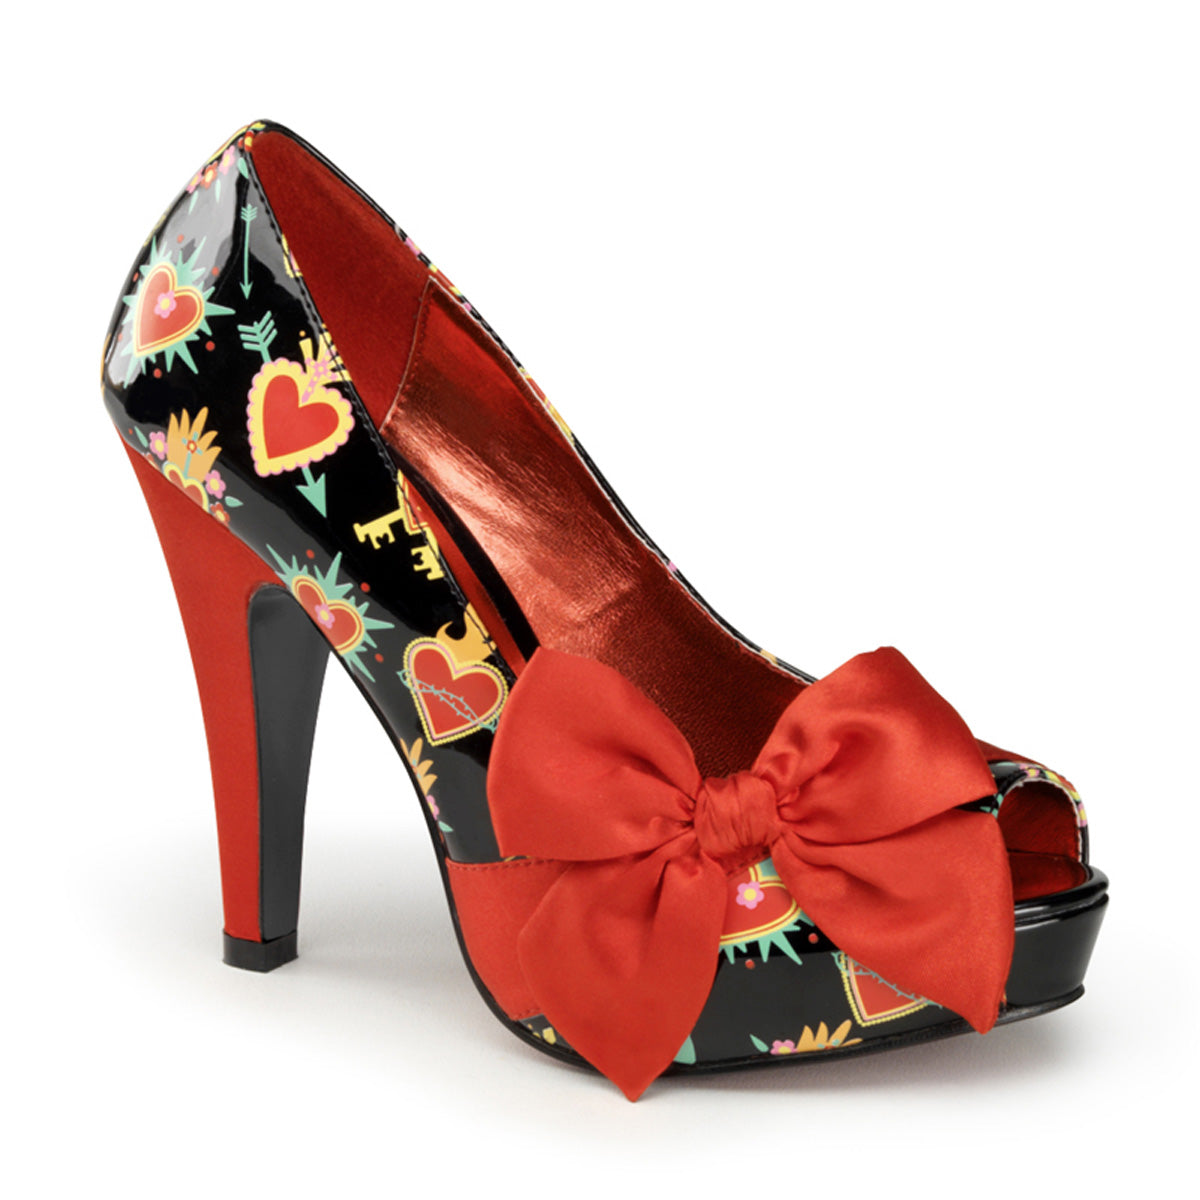 BETTIE-13 Pin Up Glamour 4.5" Heel Black Red Platforms Shoes